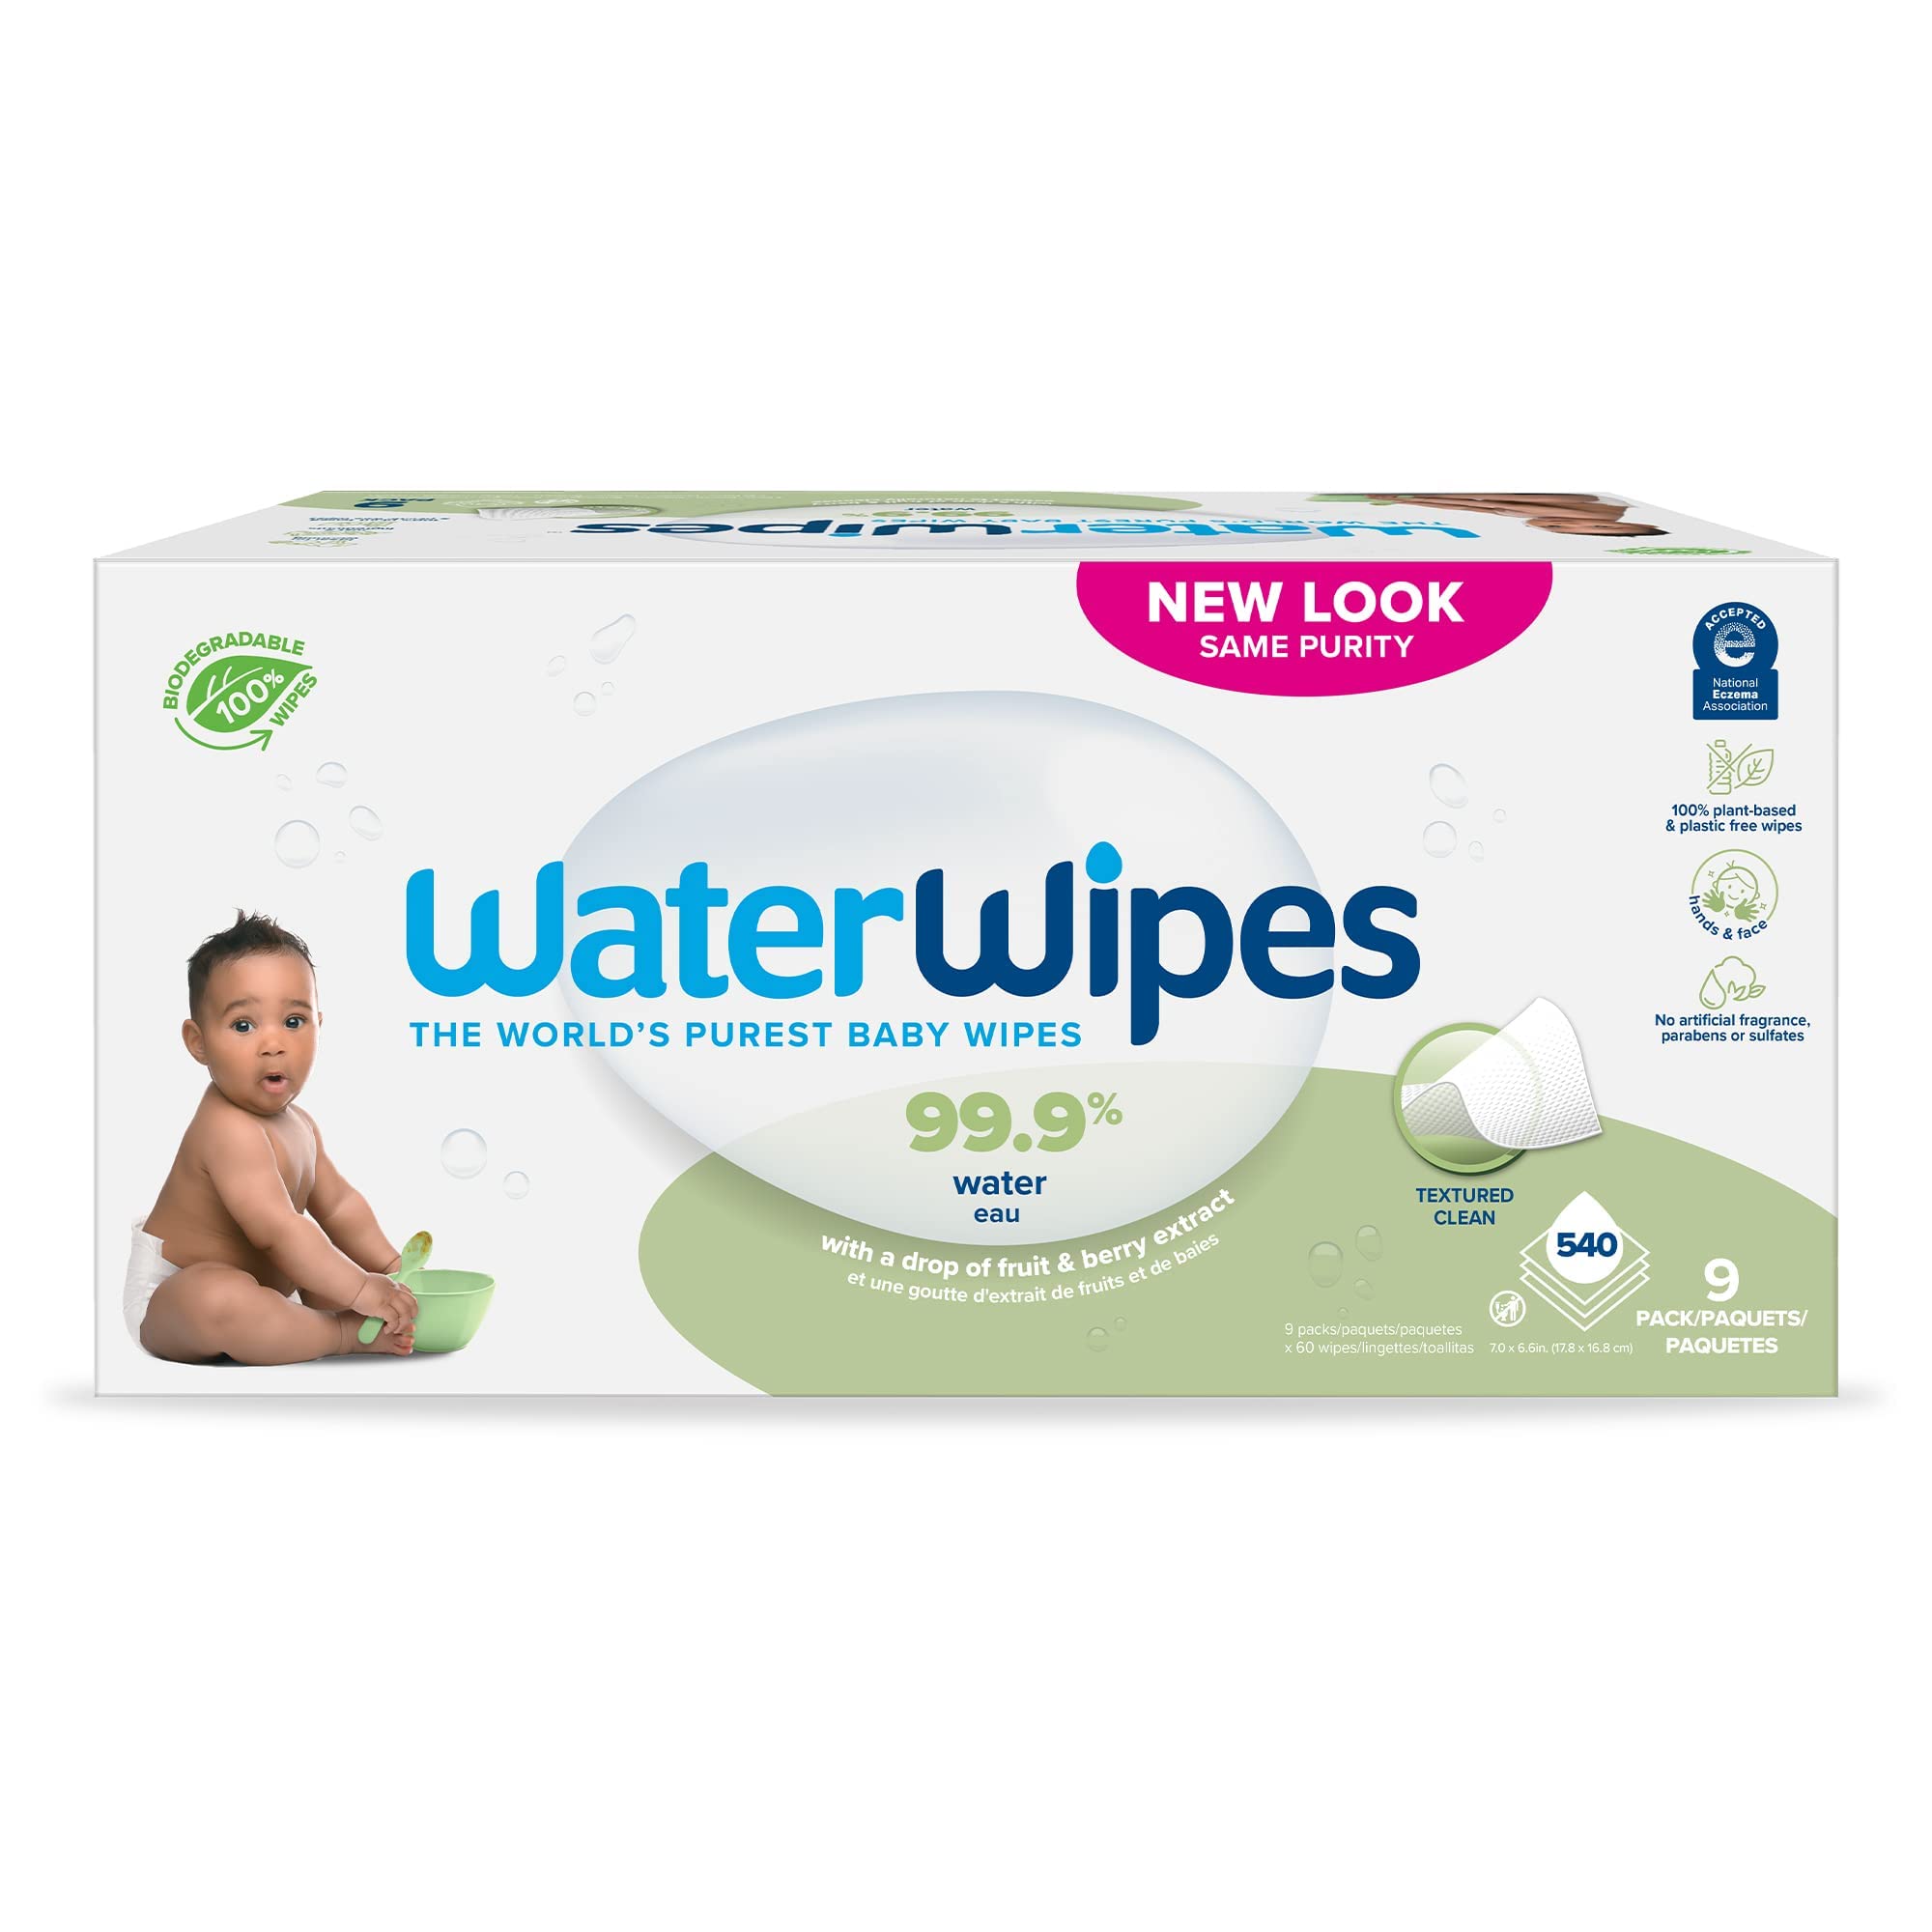 Book Cover WaterWipes Plastic-Free Textured Clean, Toddler & Baby Wipes, 99.9% Water Based Wipes, Unscented & Hypoallergenic For Sensitive Skin, 540 Count (9 Packs), Packaging May Vary 60 Count (Pack of 9)